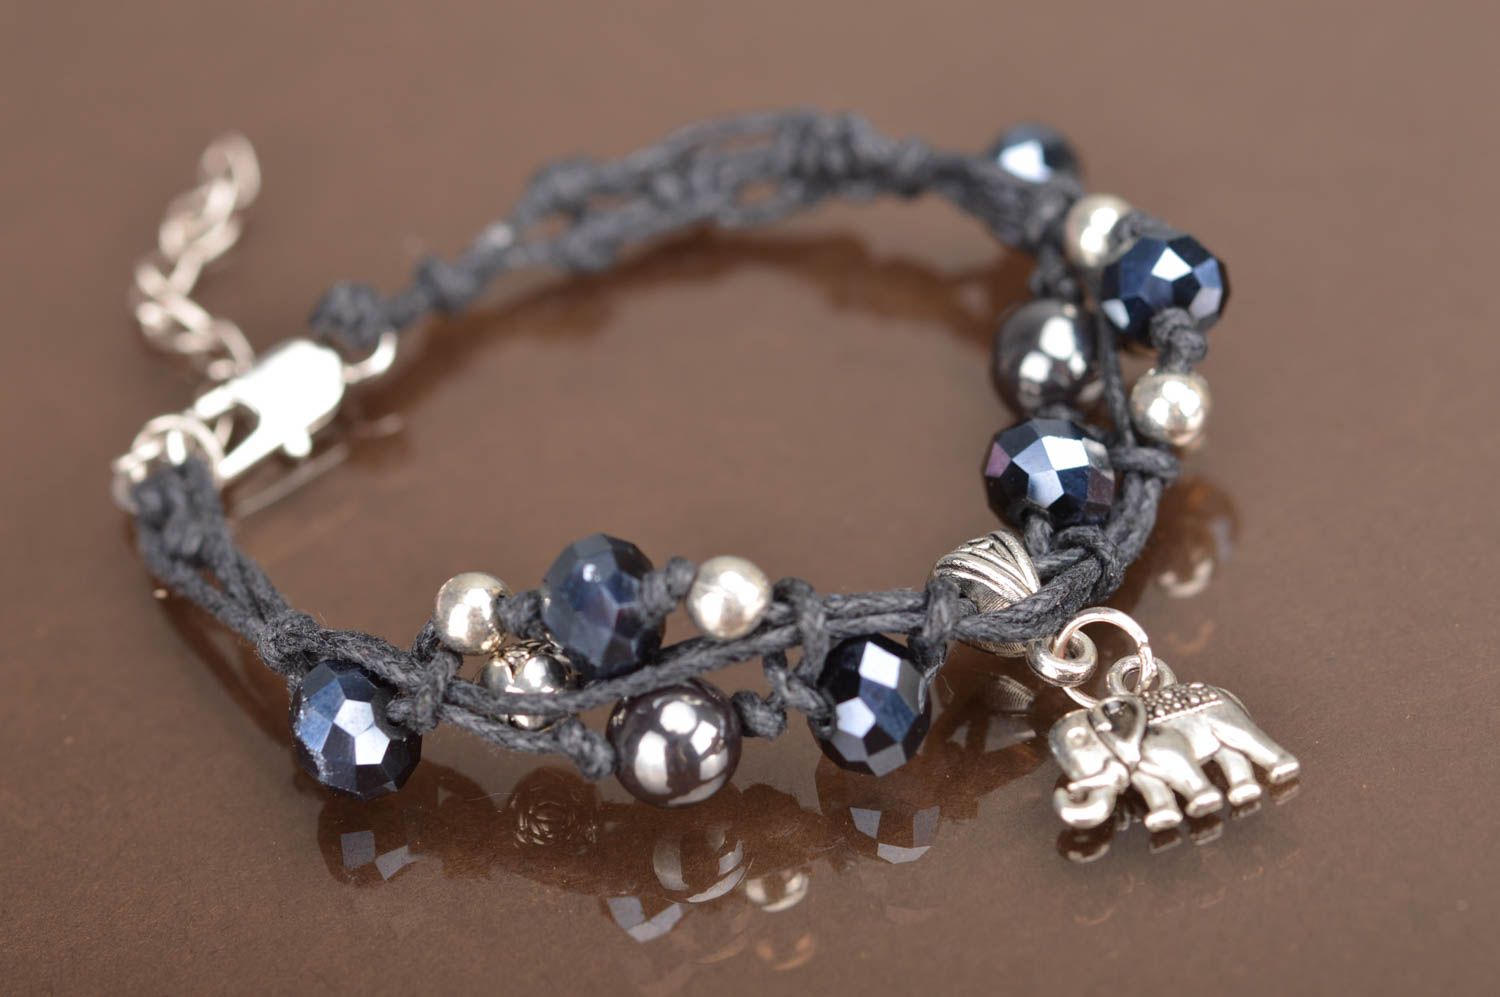 Handmade cute bracelet made of waxed lace with crystal beads and charm photo 2